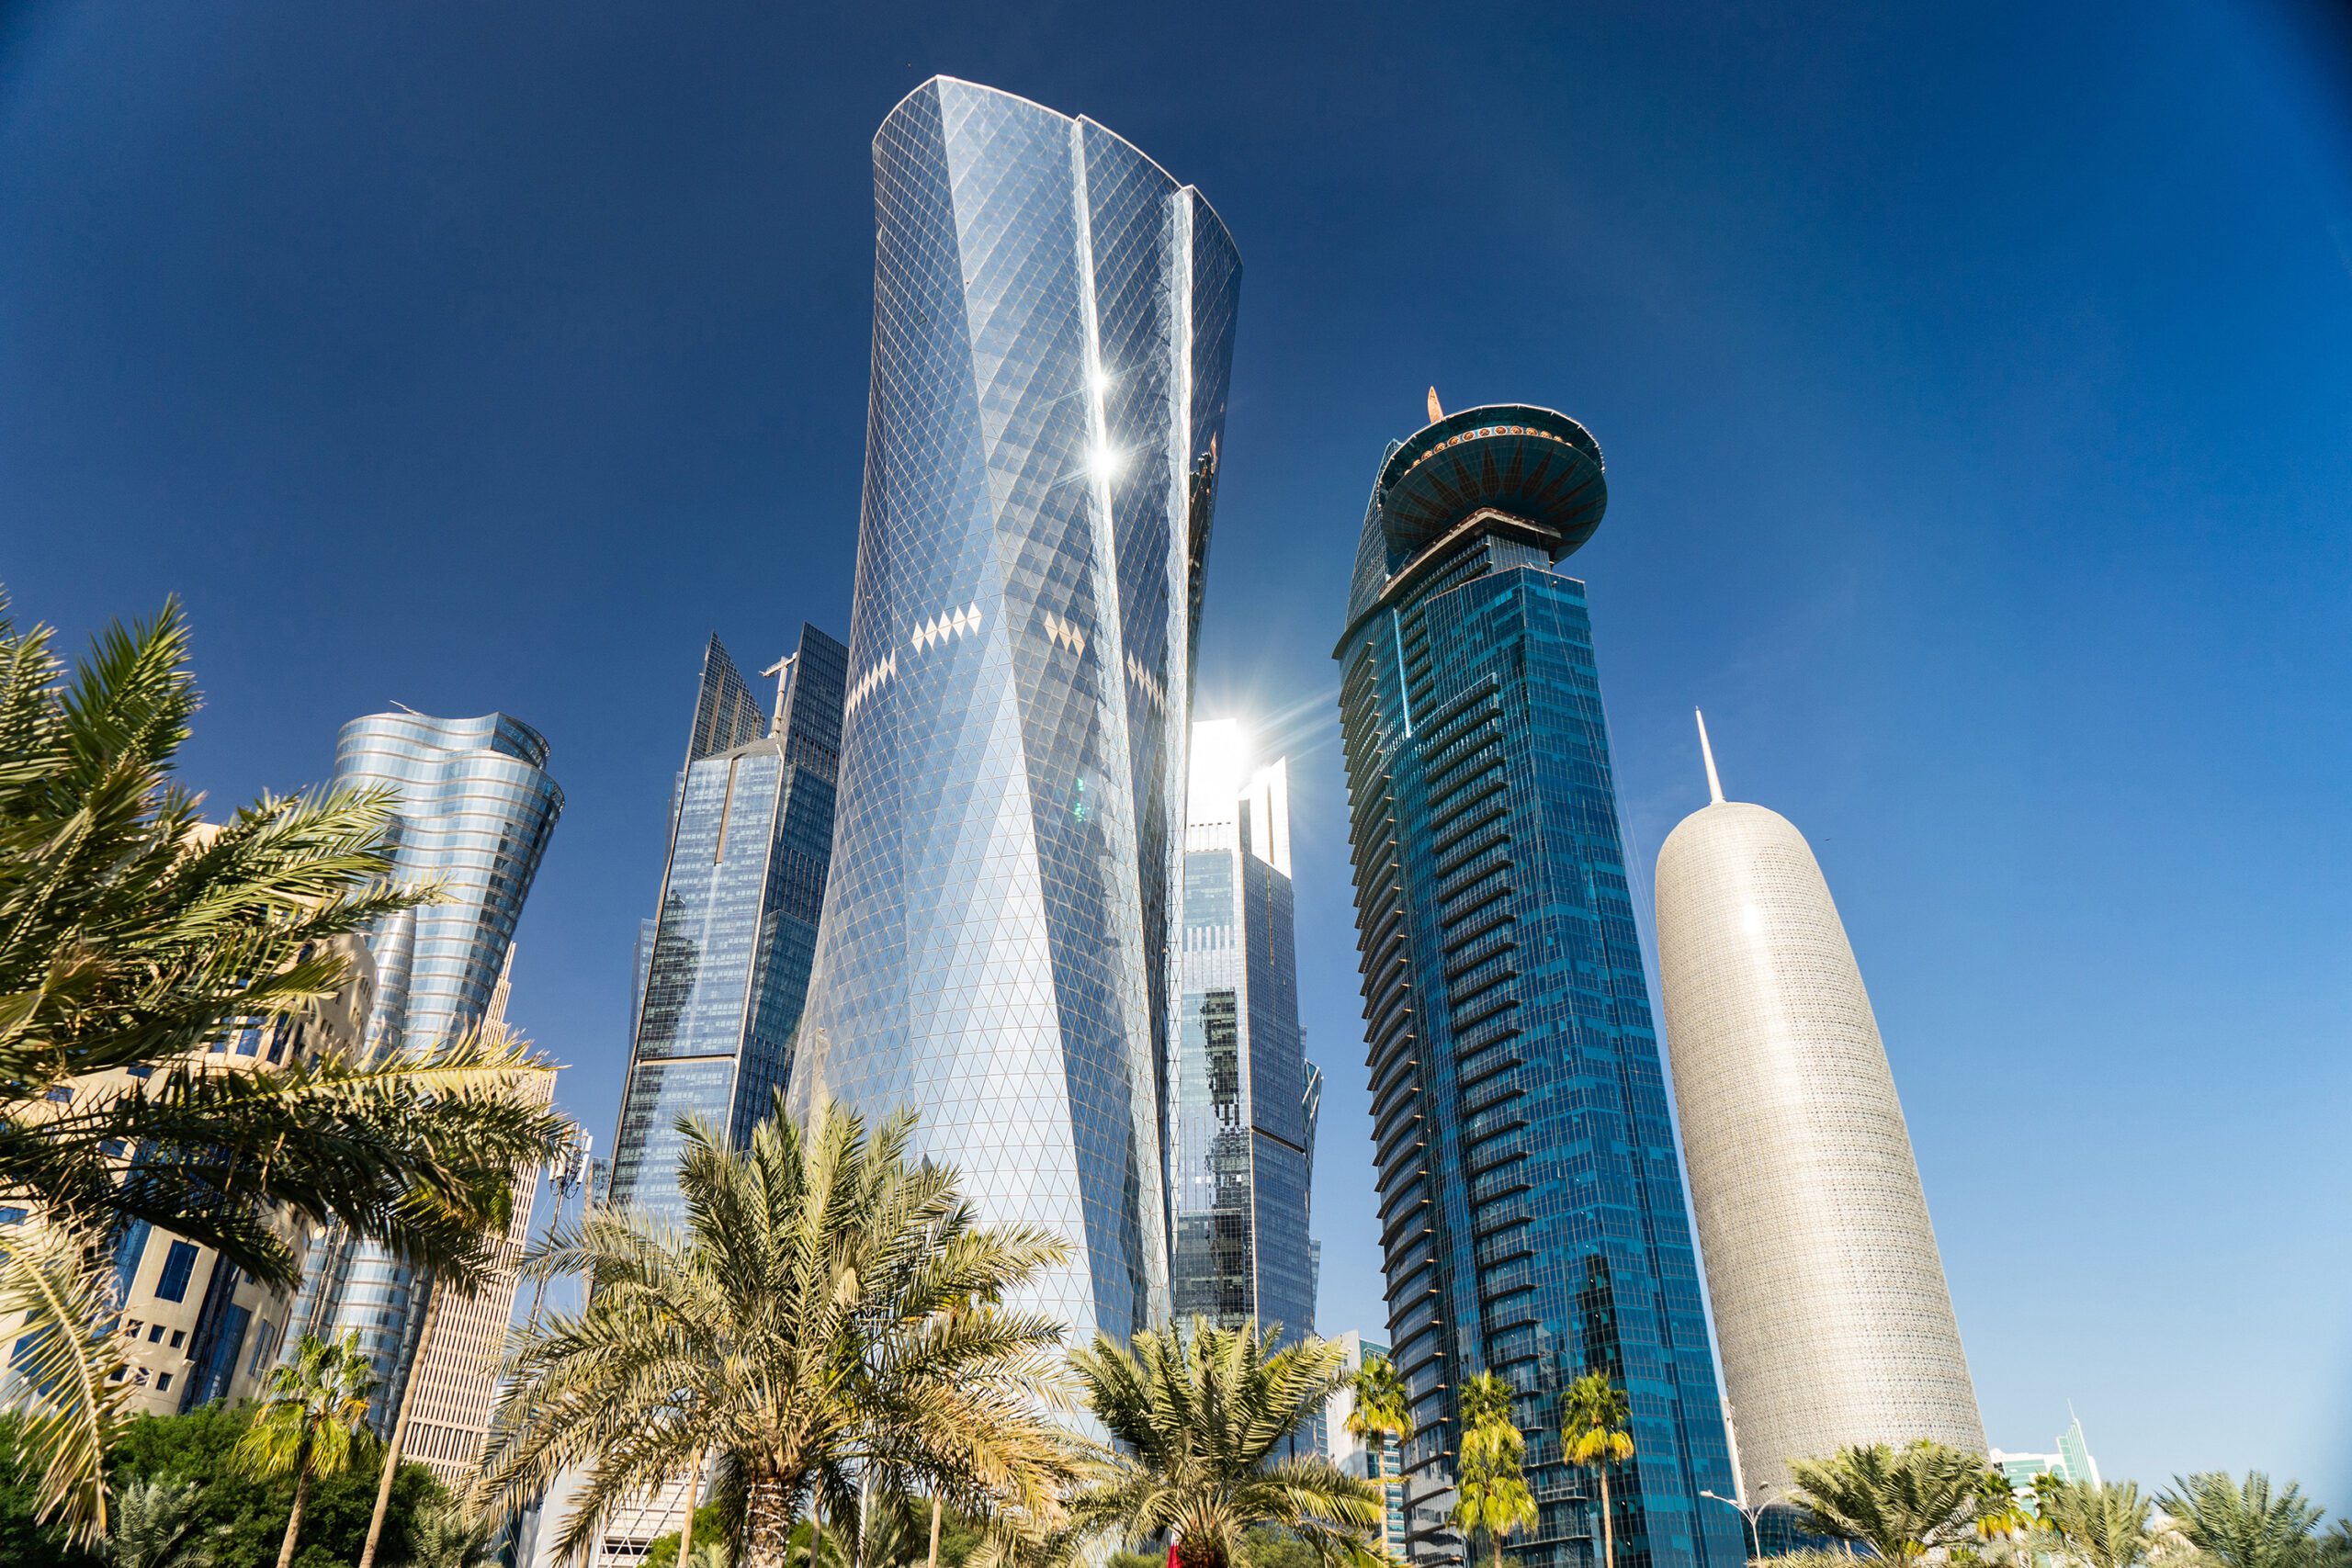 Modern city center with Towers and skyscrapers on sunny sky background. Doha, Qatar 2020